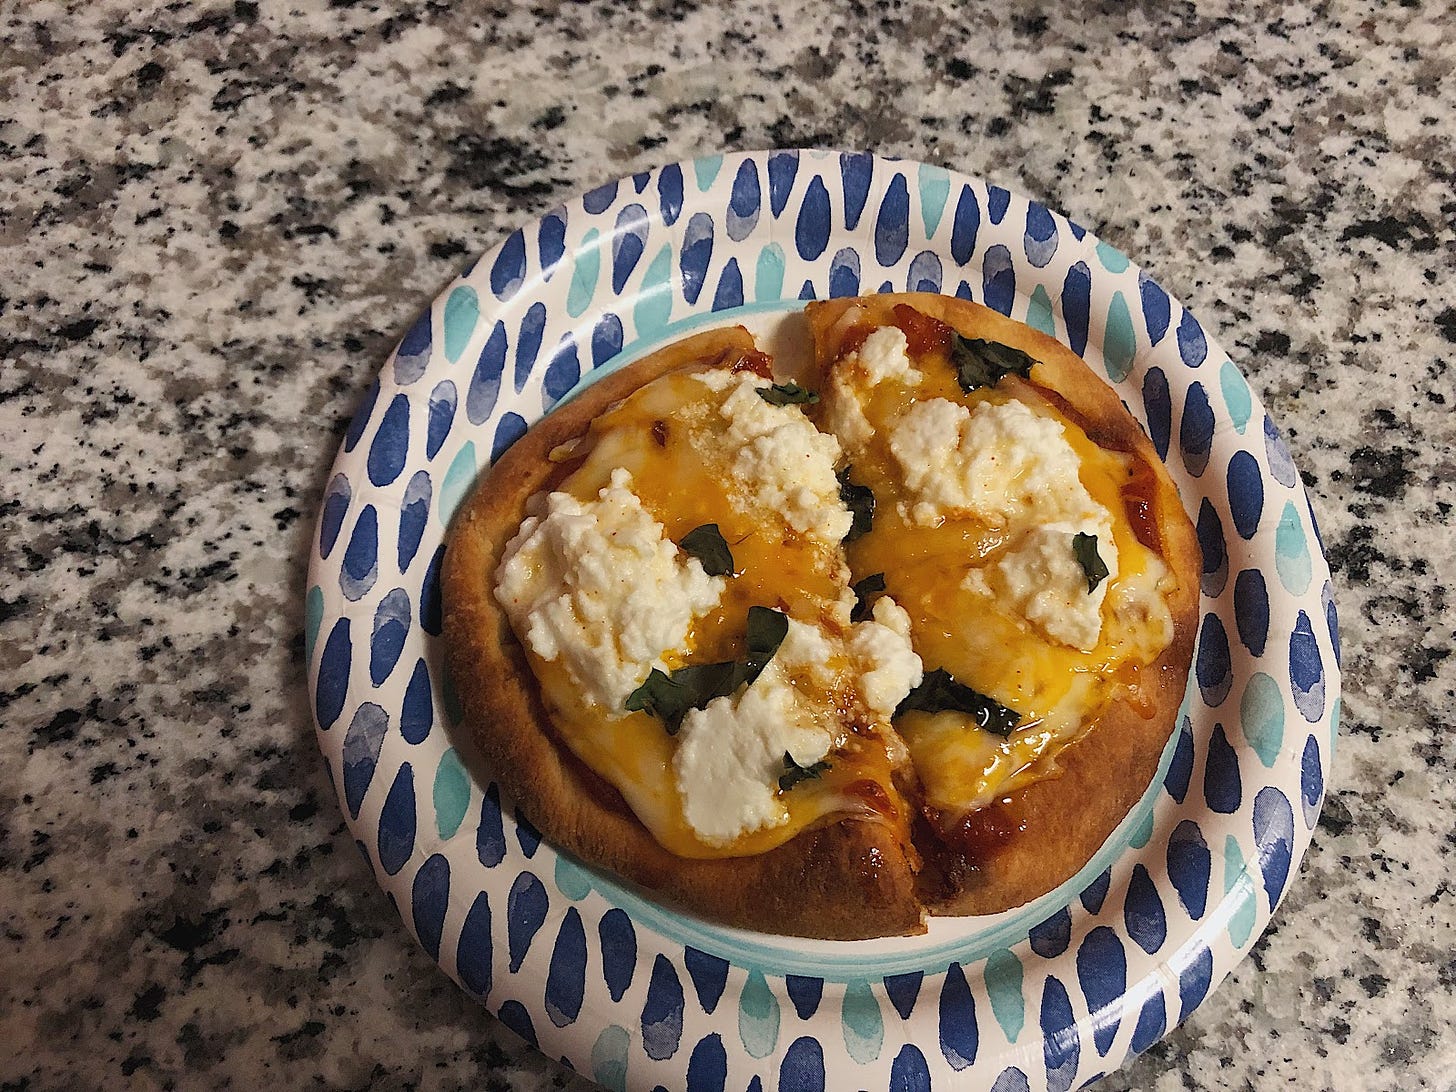 A overhead view of a mini naan pizza on a paper plate with blobs of ricotta and basil